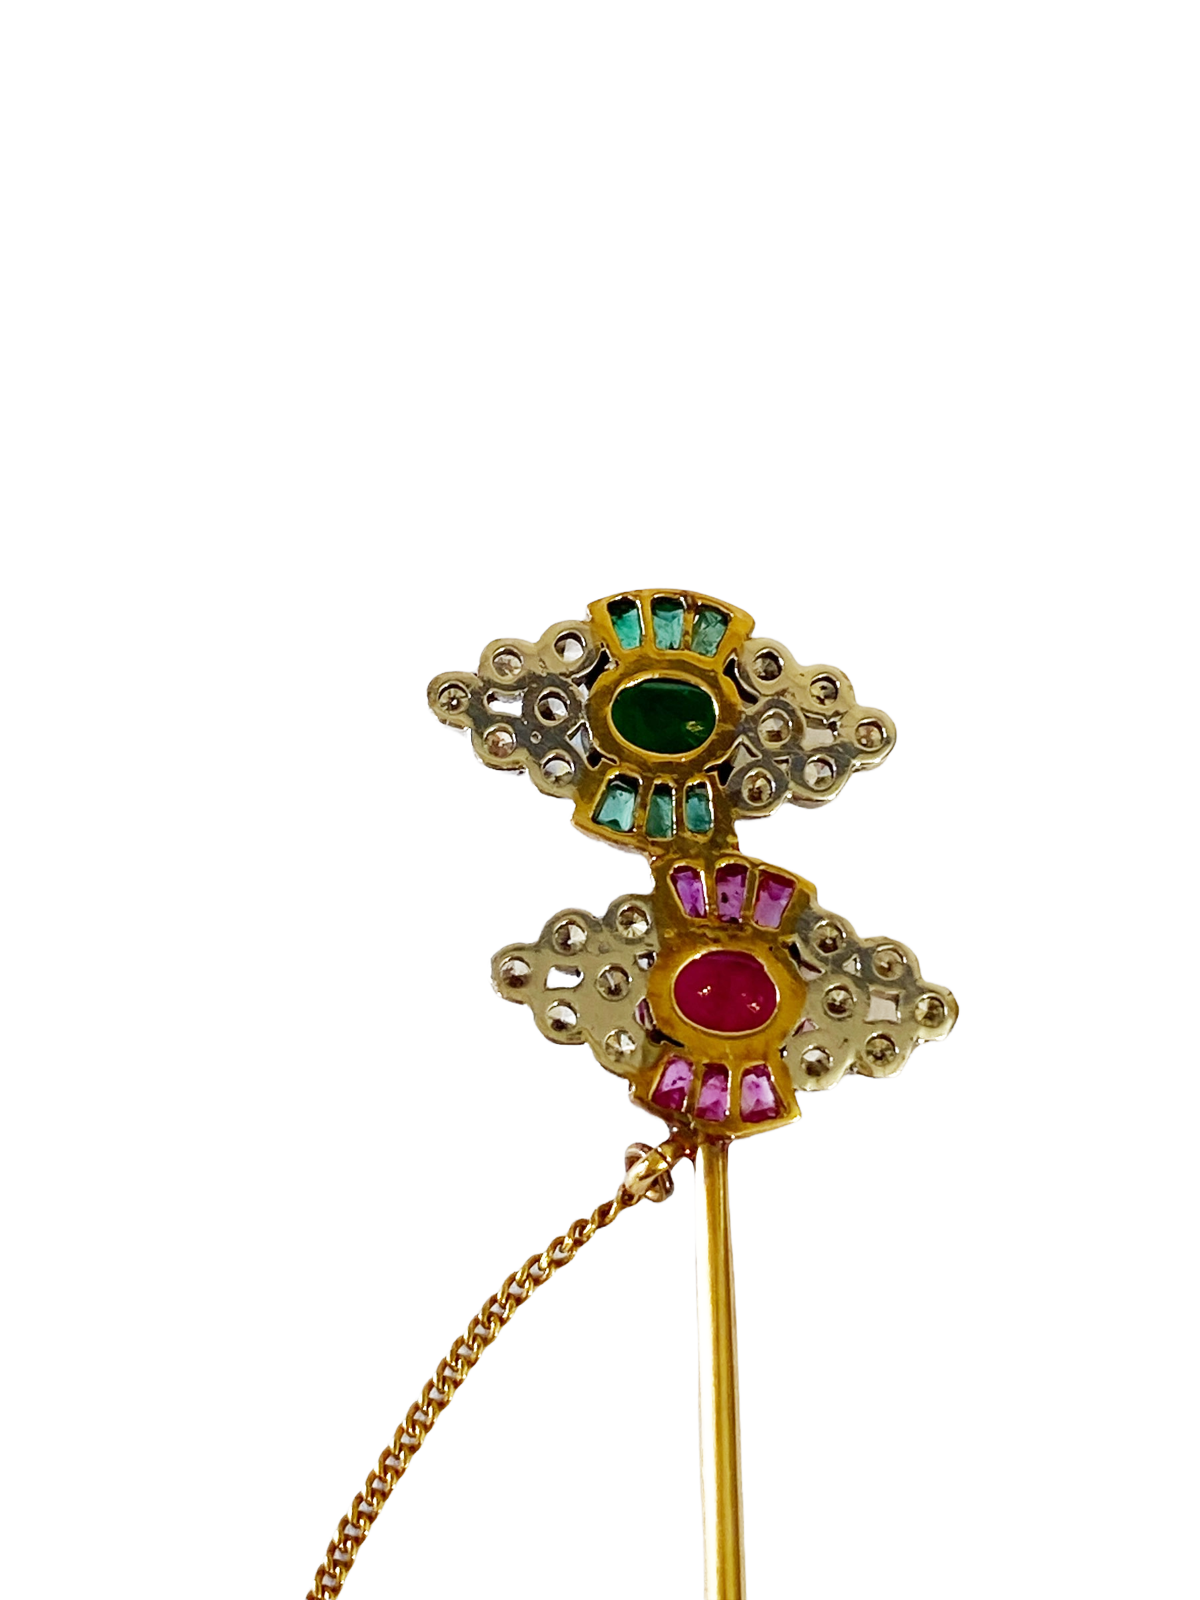 #4782 Antique European 18k Two Toned Gold Emerald and Ruby Stick Pin